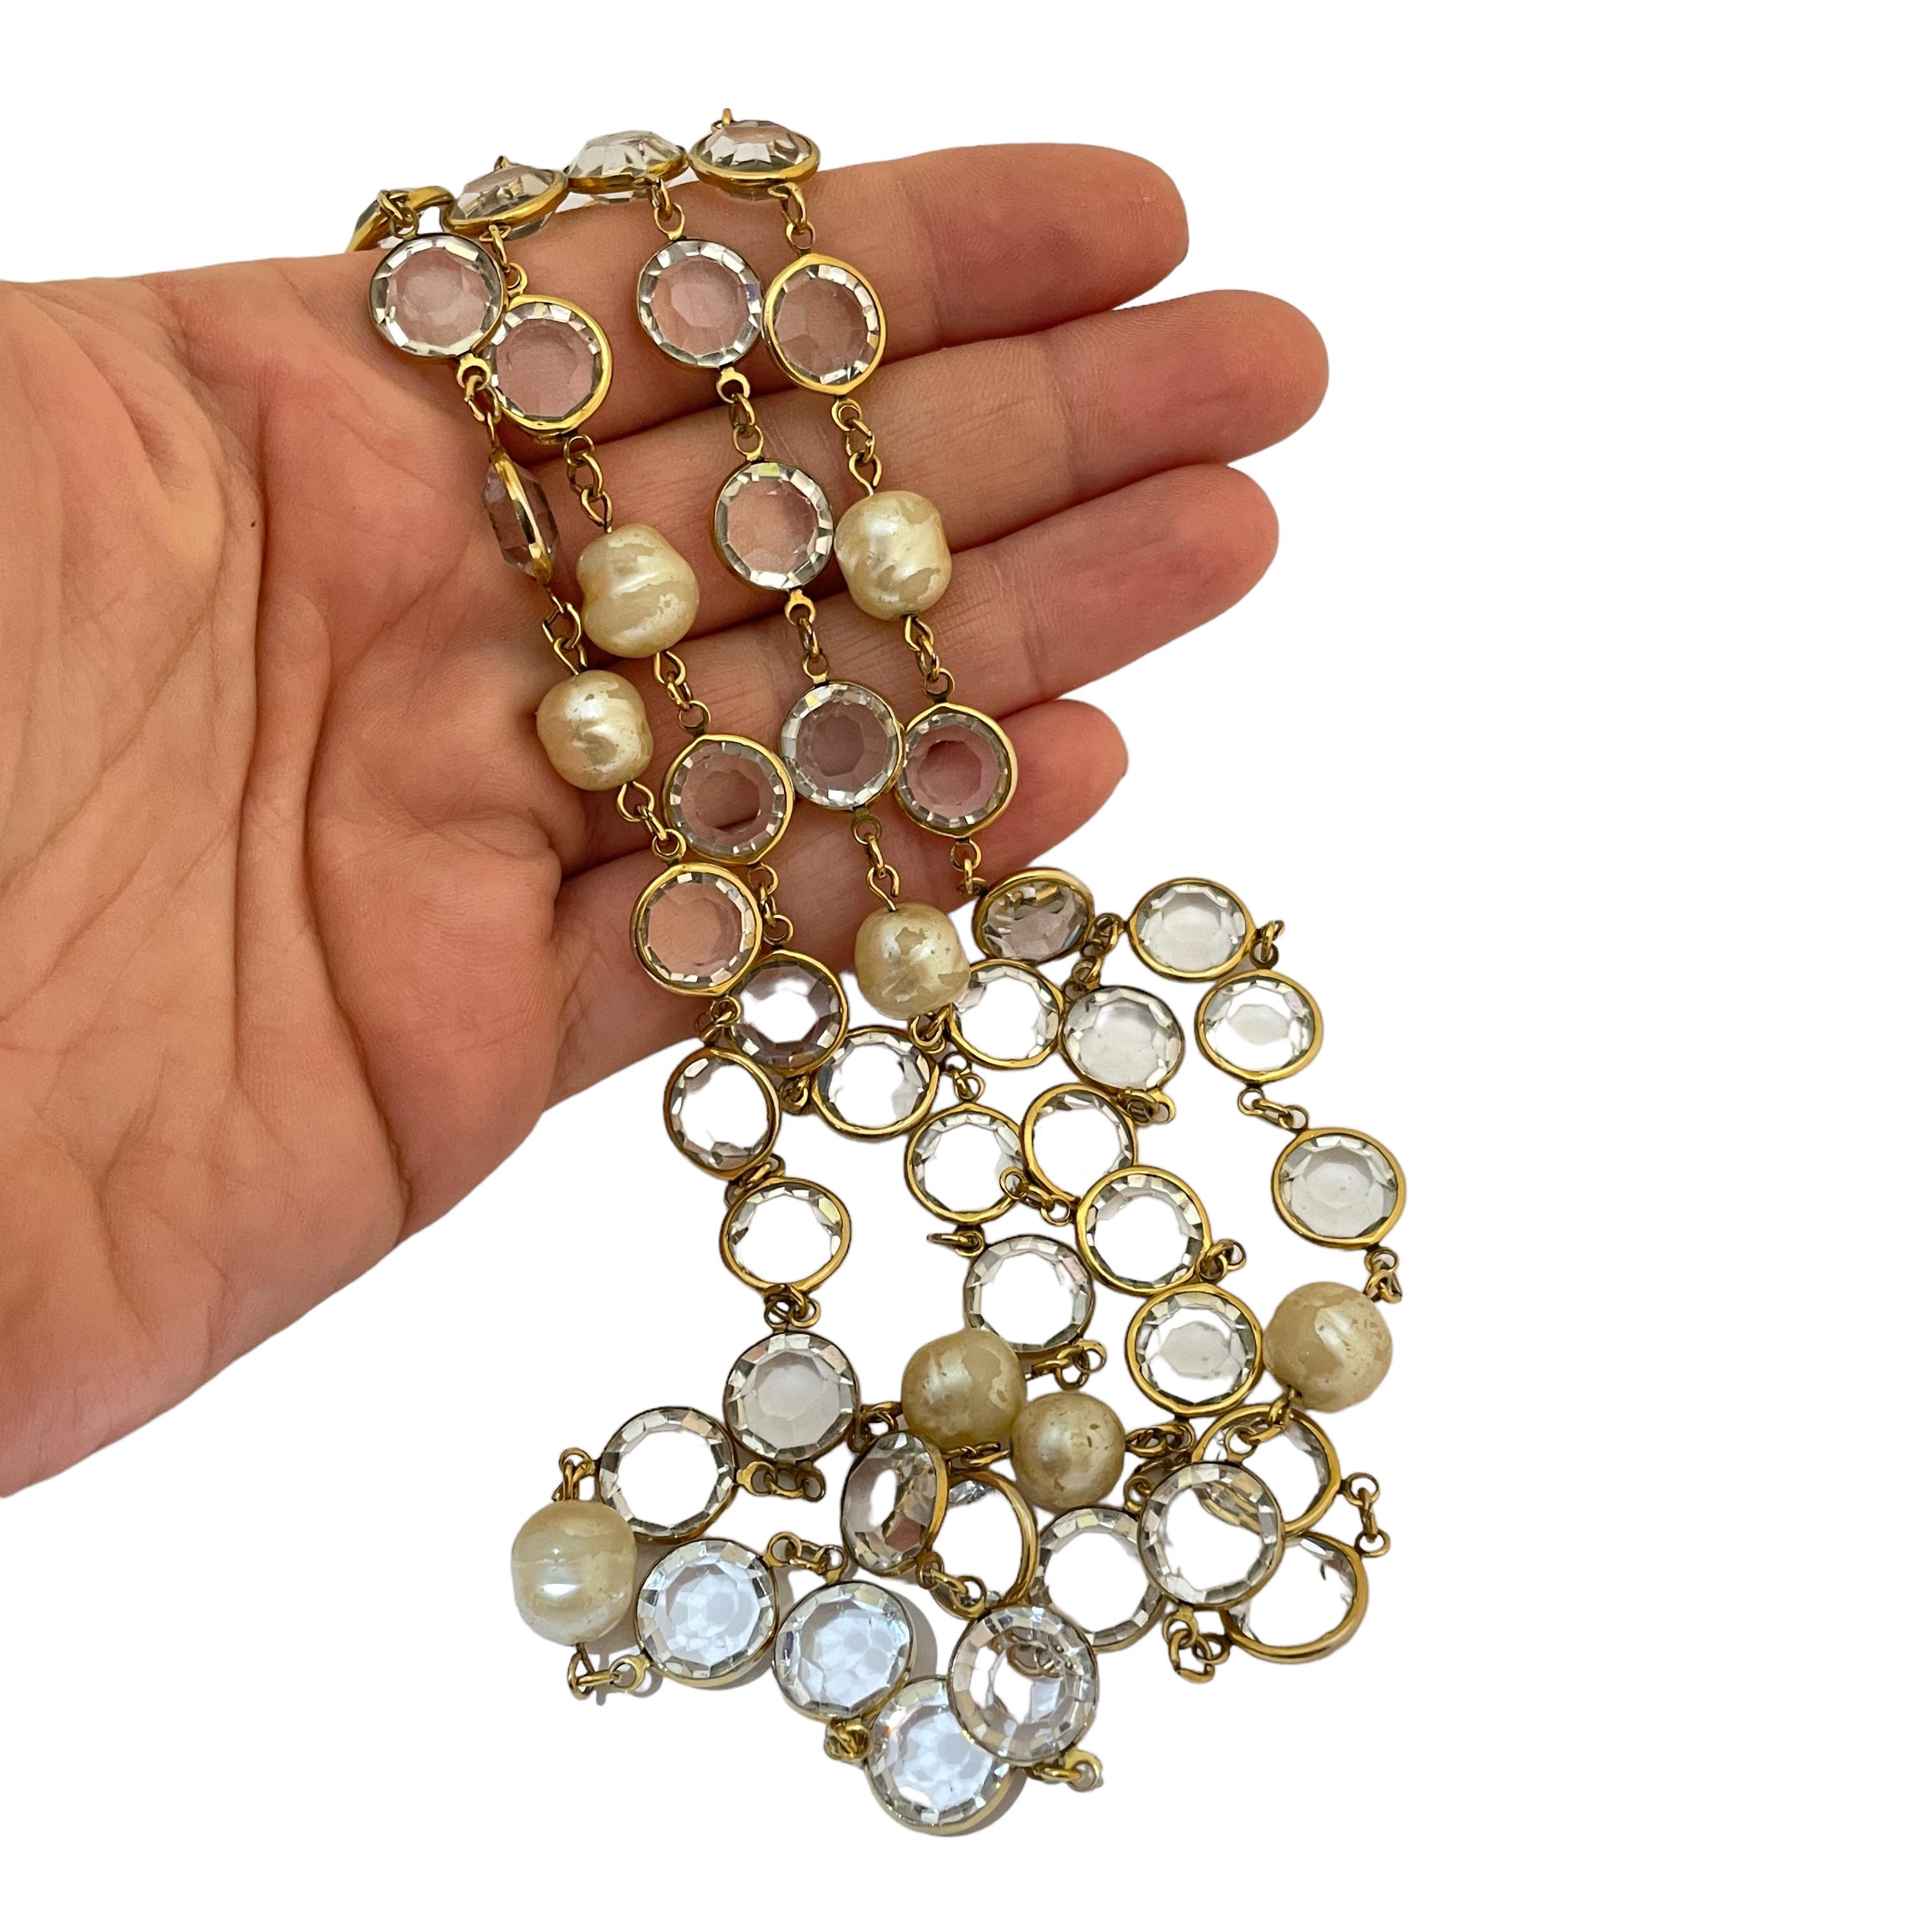 DETAILS

• CHANEL Made in France (no tag)

• gold plated, crystal, glass

• vintage designer runway necklace

MEASUREMENTS

•

CONDITION 

• very good vintage condition with minimal signs of wear, lots of wear/peeling on pearl beads


❤️❤️ VINTAGE